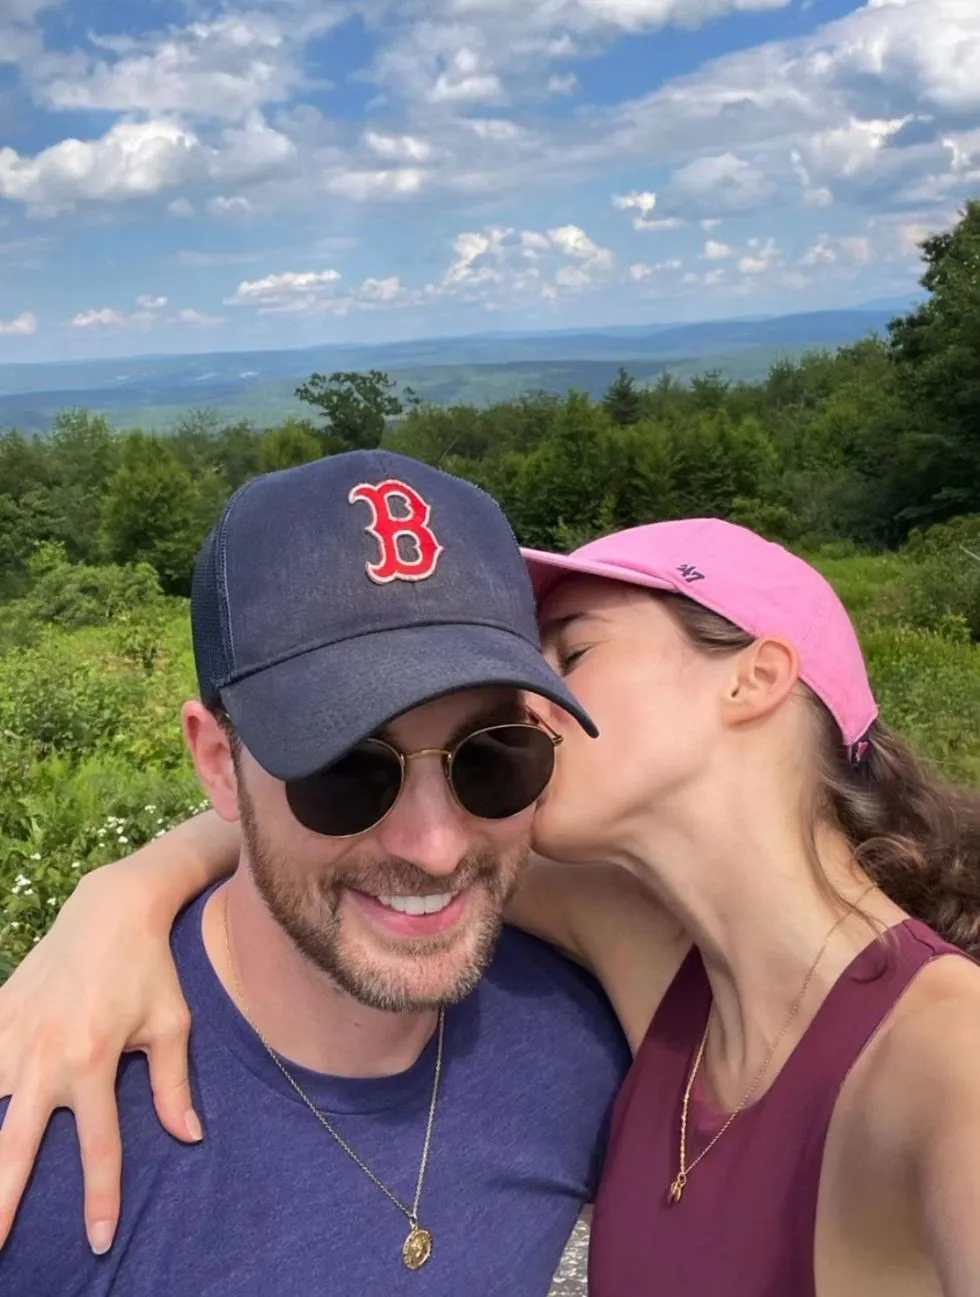 Who Is Alba Baptista? All About Chris Evans’ Wife